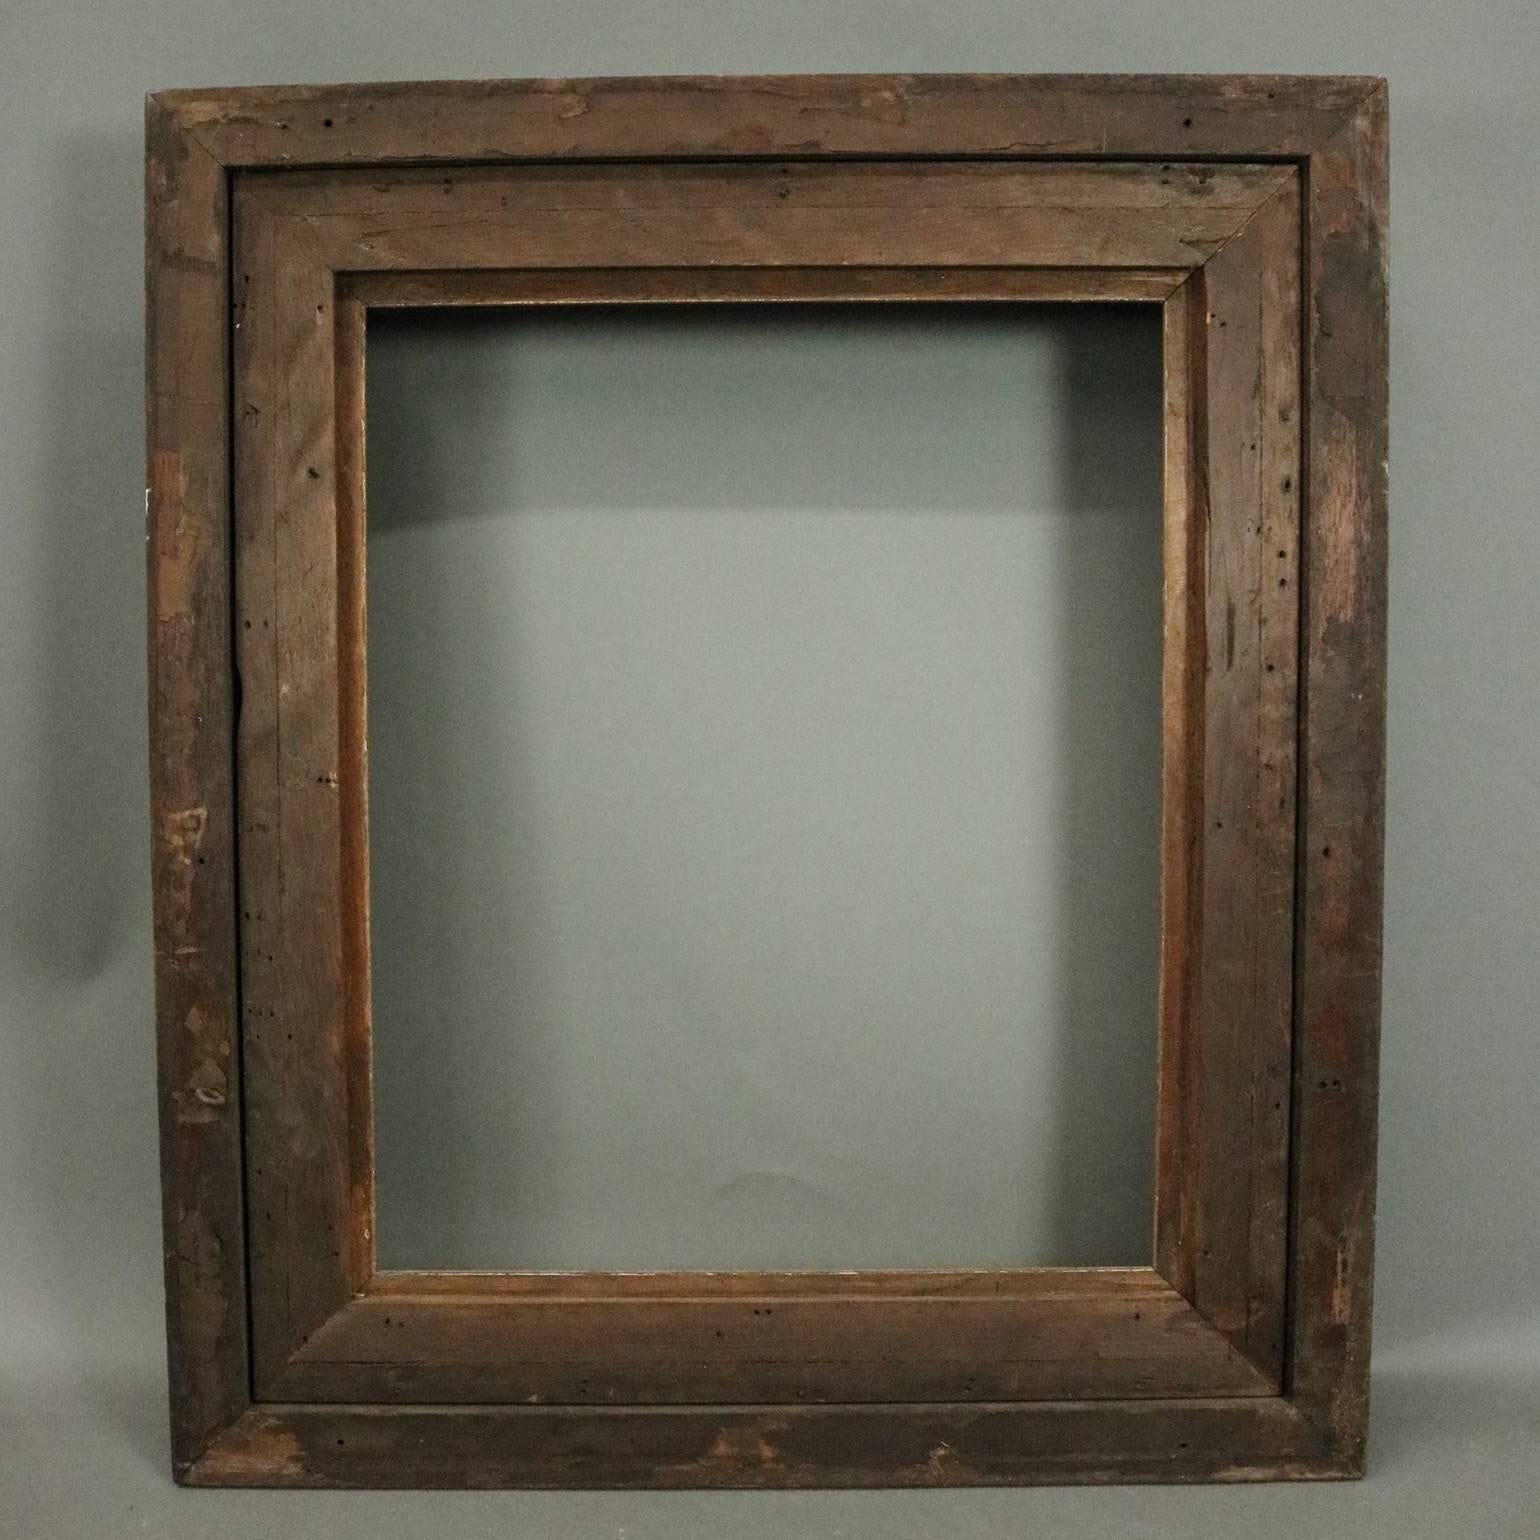 Antique Eastlake walnut fine art frame features scroll and foliate incised decoration, giltwood interior, and ebonized die joints, scallops and edging, circa 1890.

Measures: 33